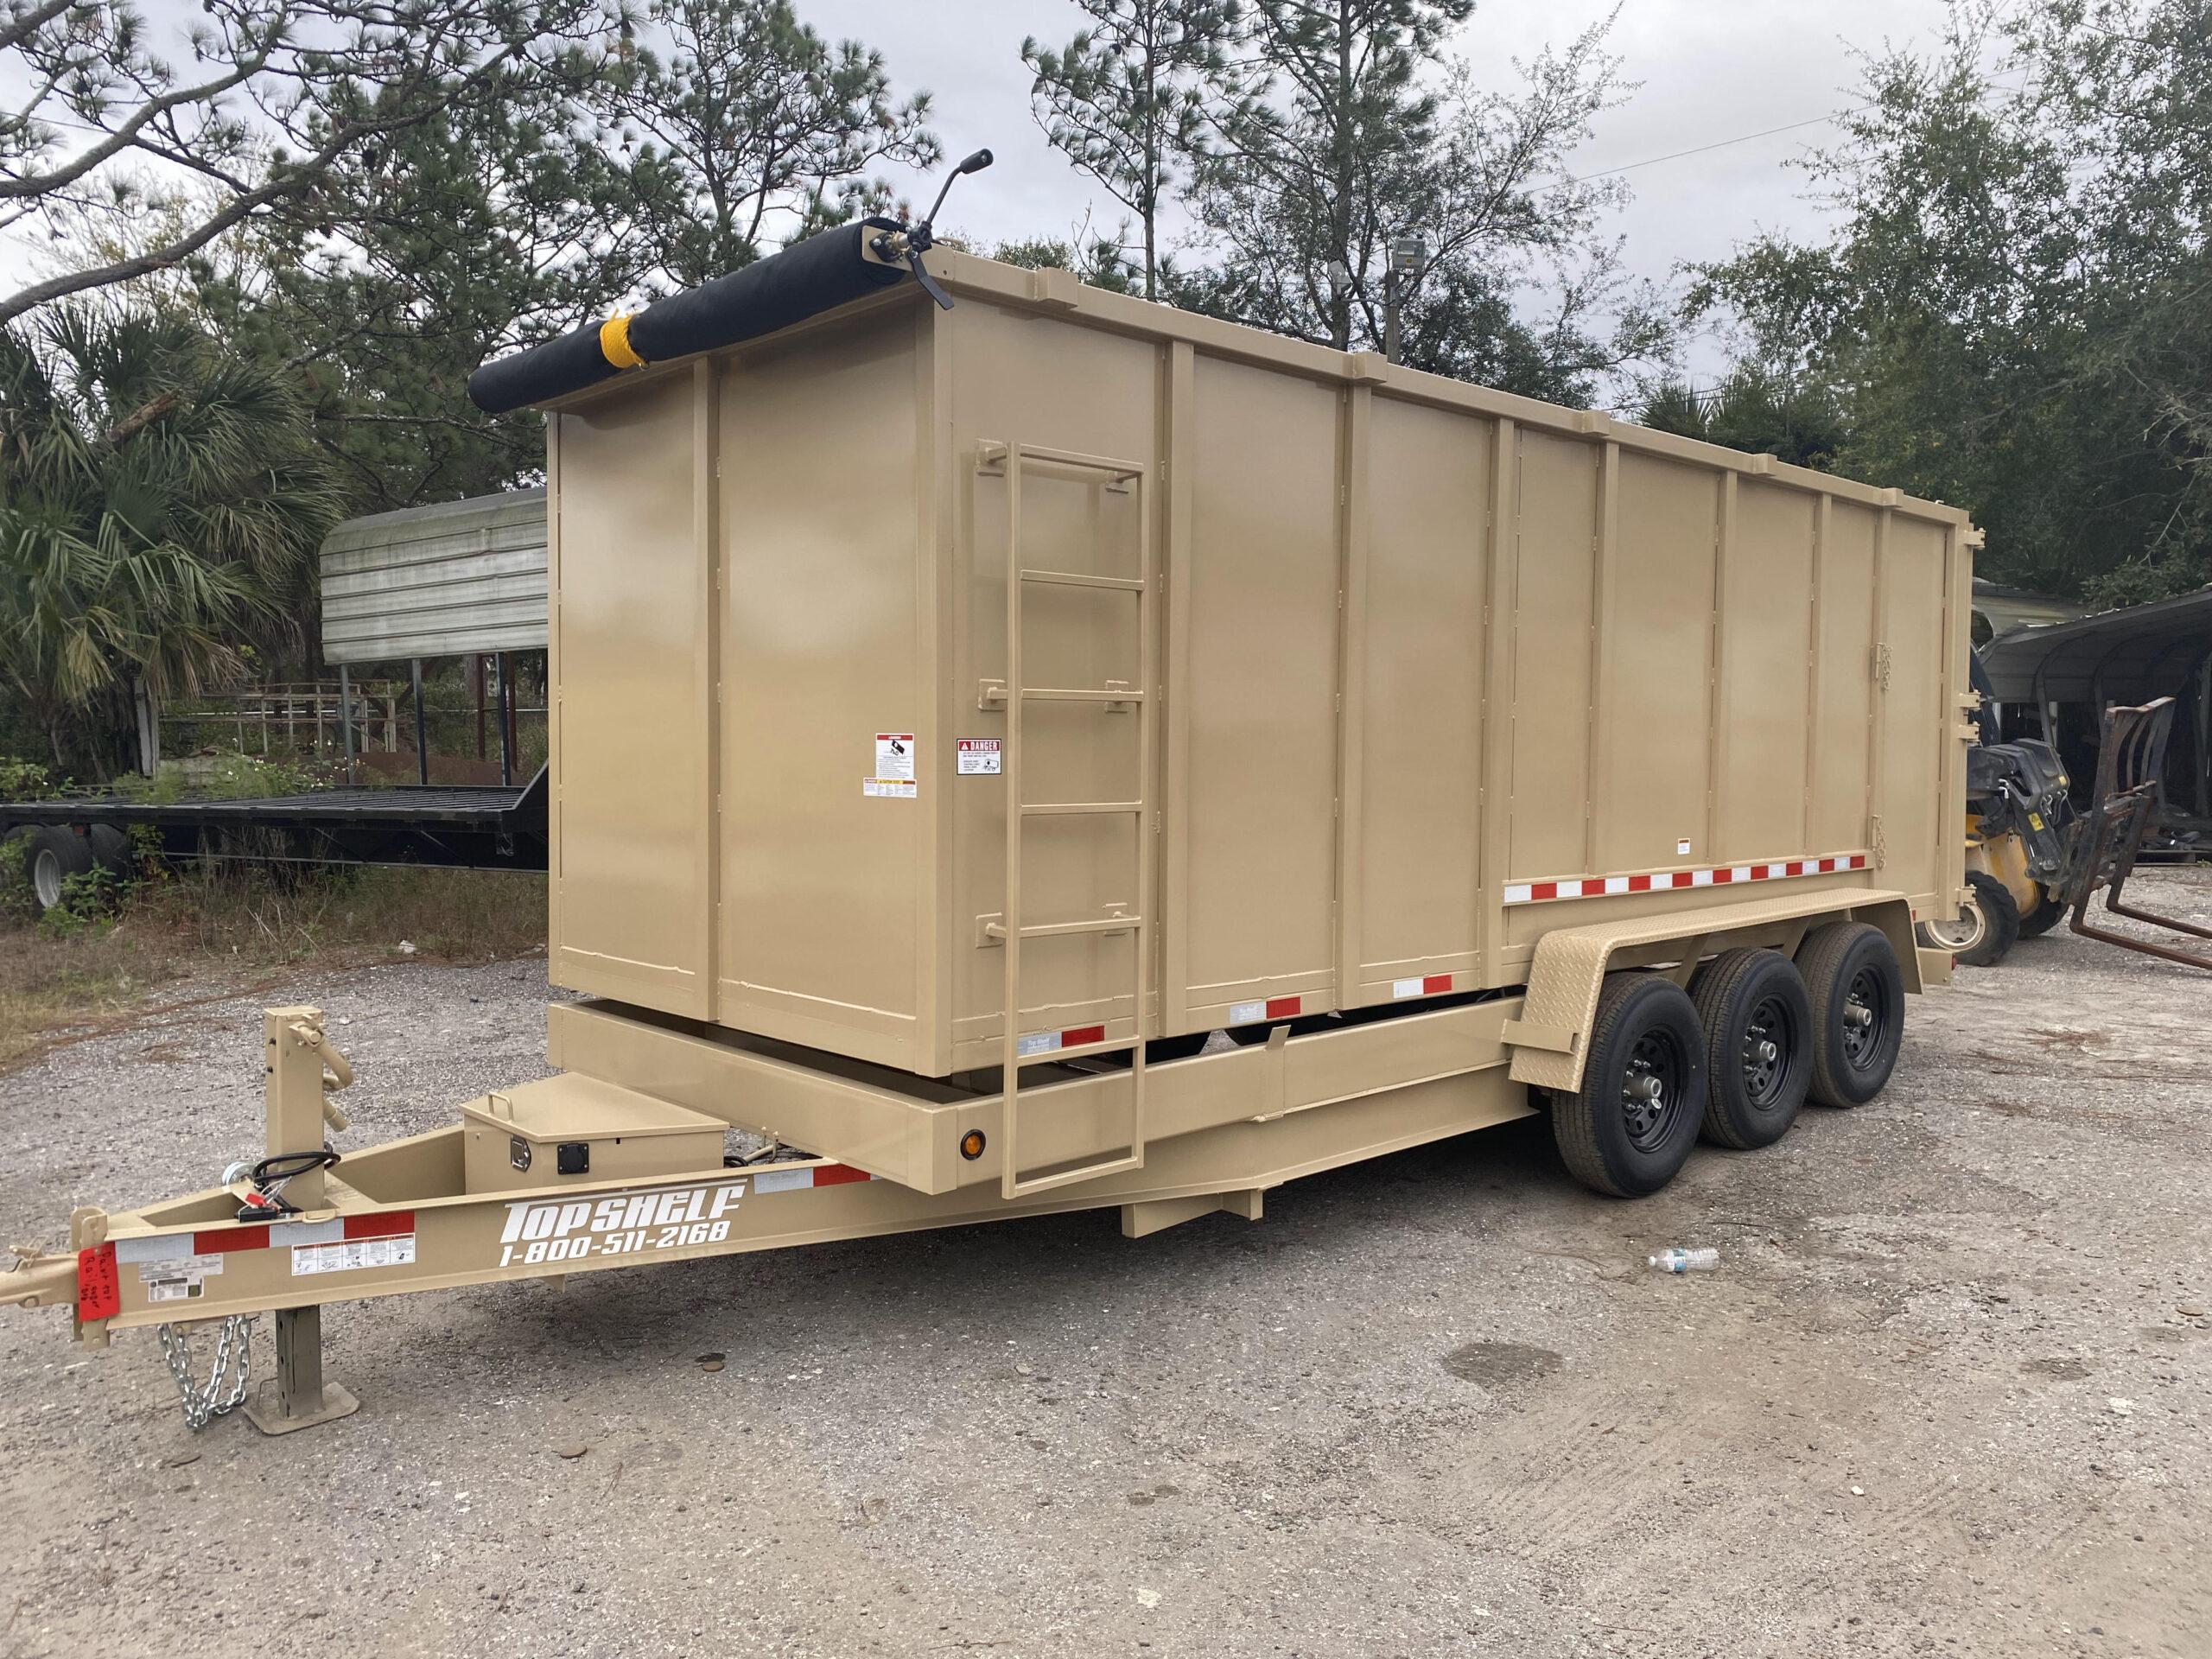 7 Essential Steps: How to Buy a Dump Trailer for Your Needs The Best Dump Trailers Buying Guides